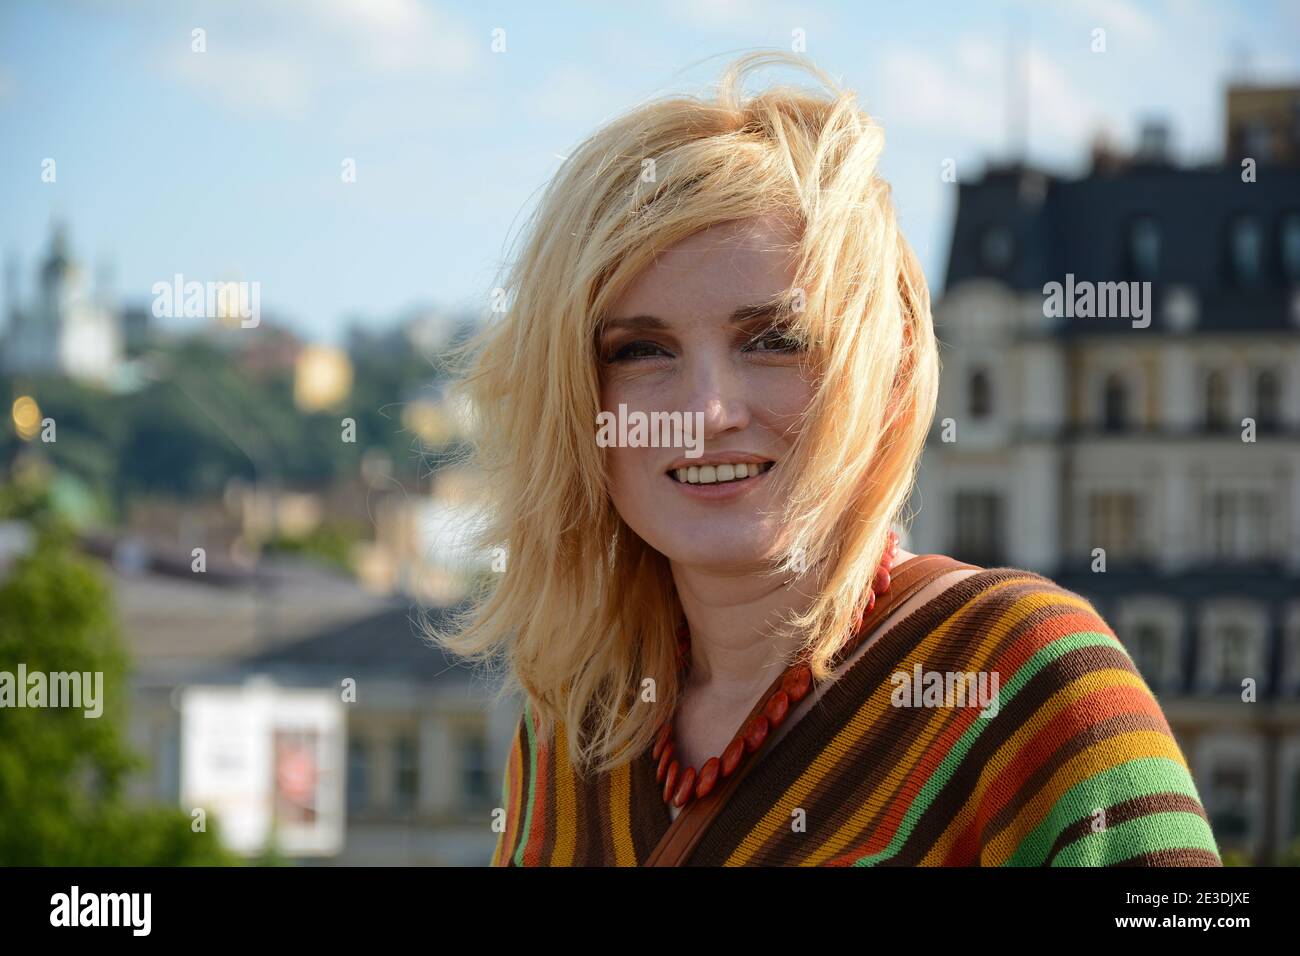 A woman with 1970-style hairstyle and clothes smiles outdoors Stock Photo